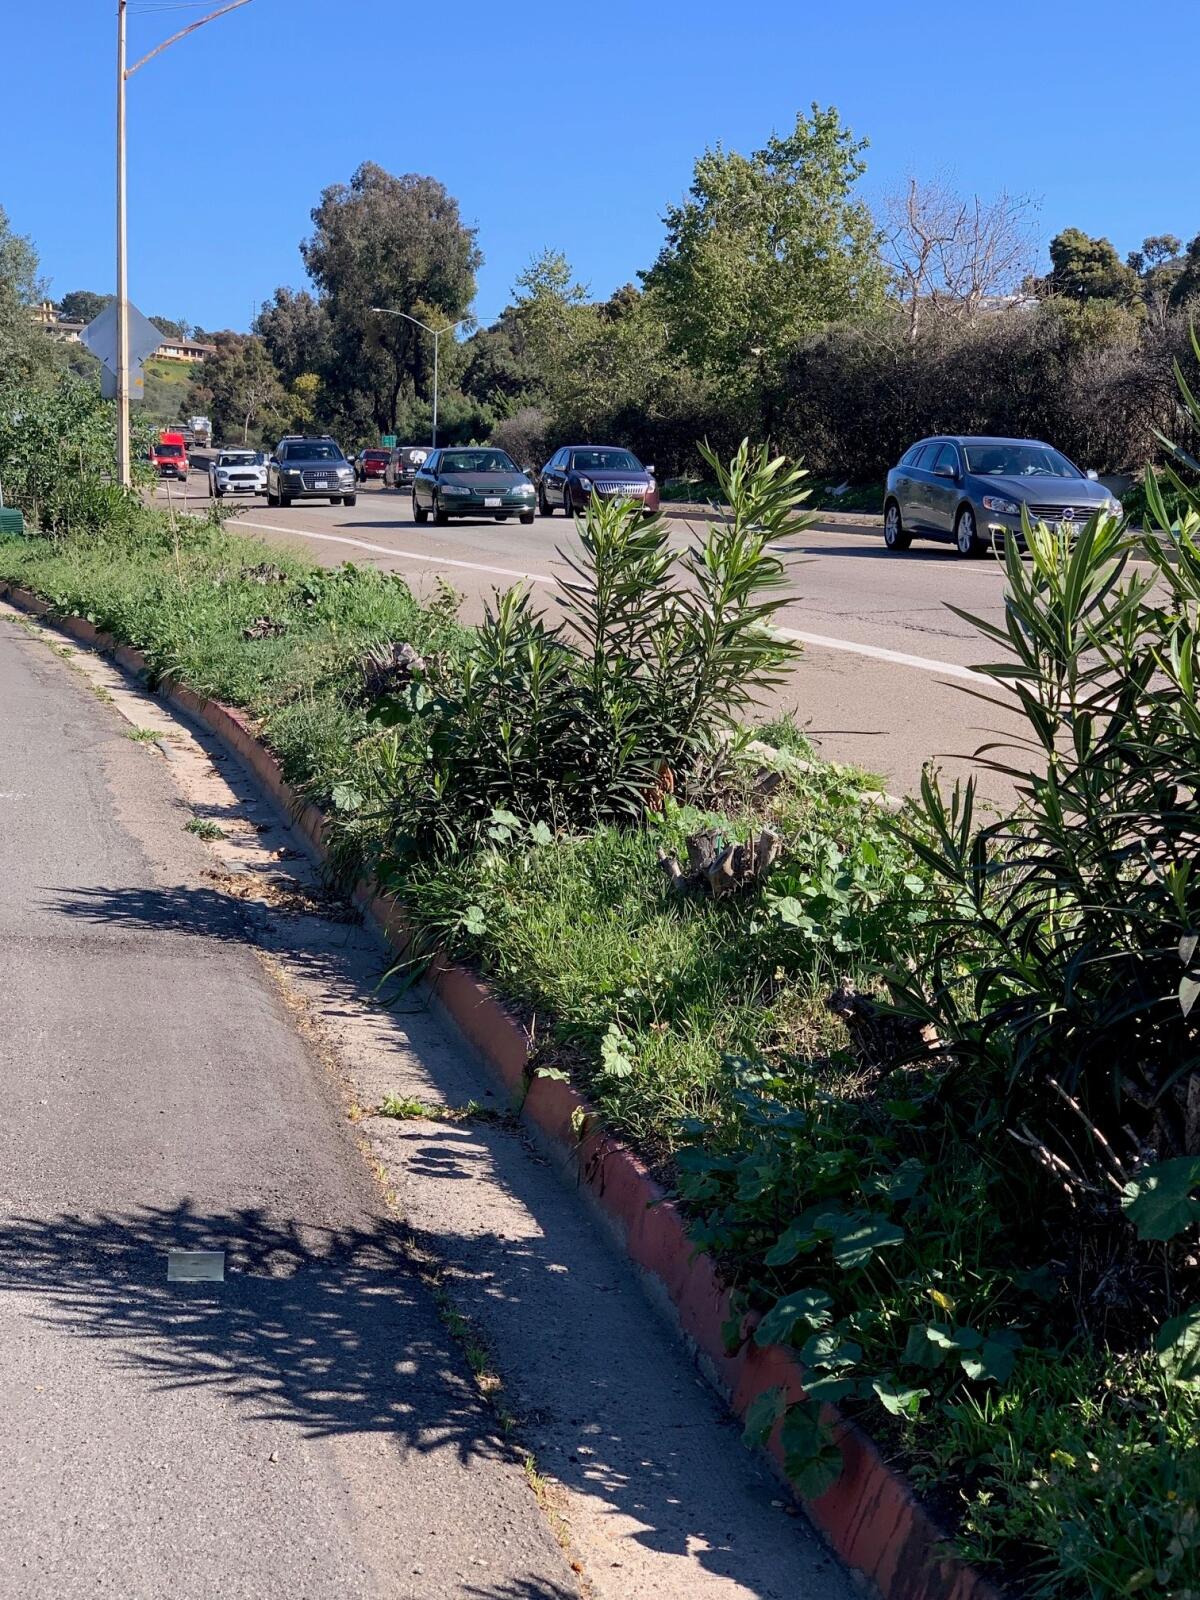 Overgrown vegetation lines La Jolla Parkway, which some residents want to see cleaned up.